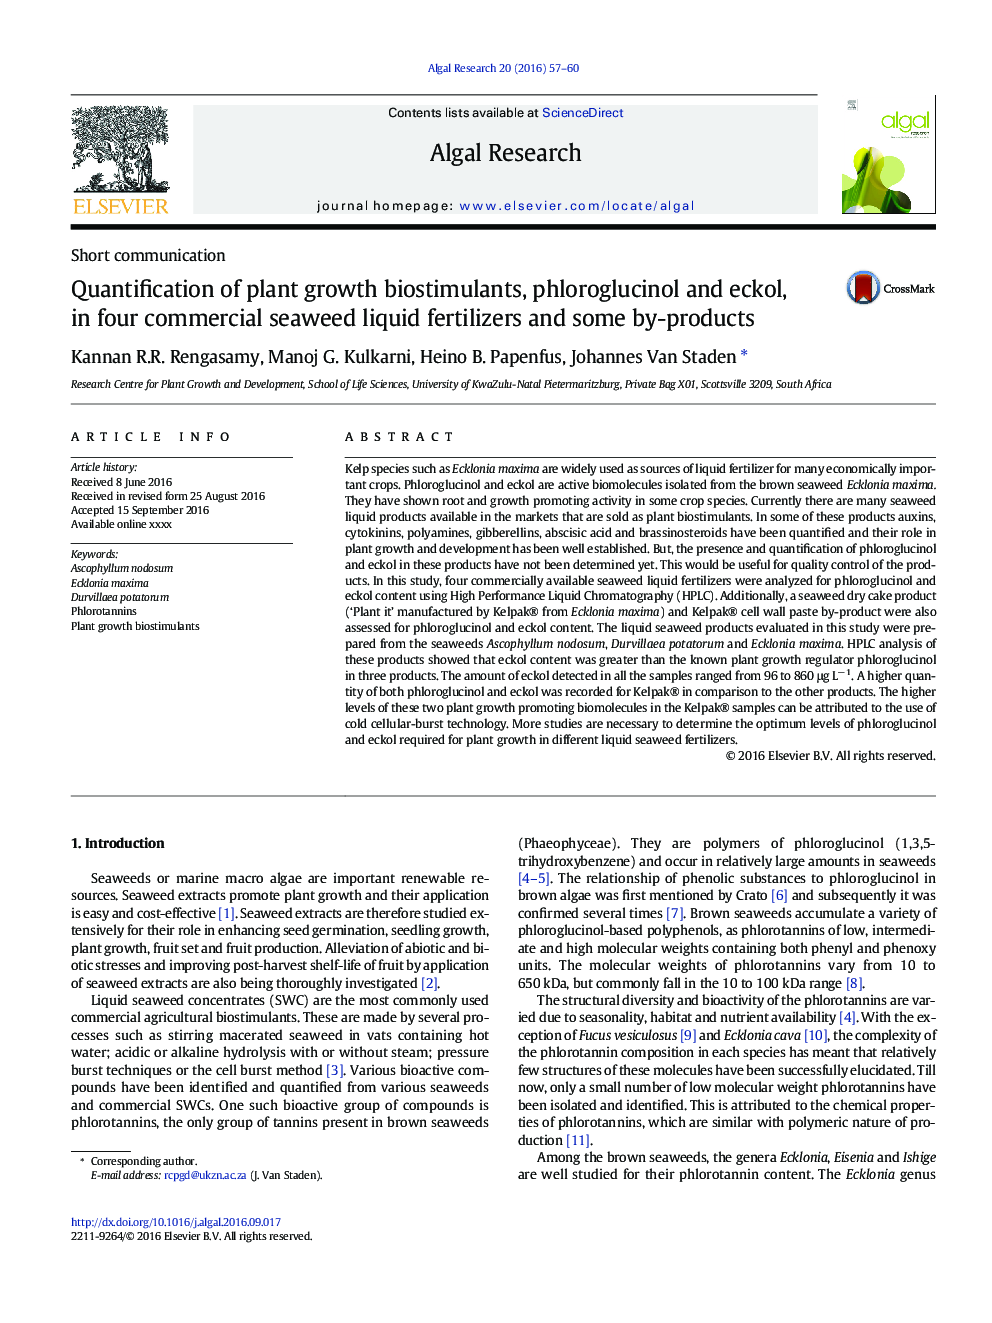 Quantification of plant growth biostimulants, phloroglucinol and eckol, in four commercial seaweed liquid fertilizers and some by-products